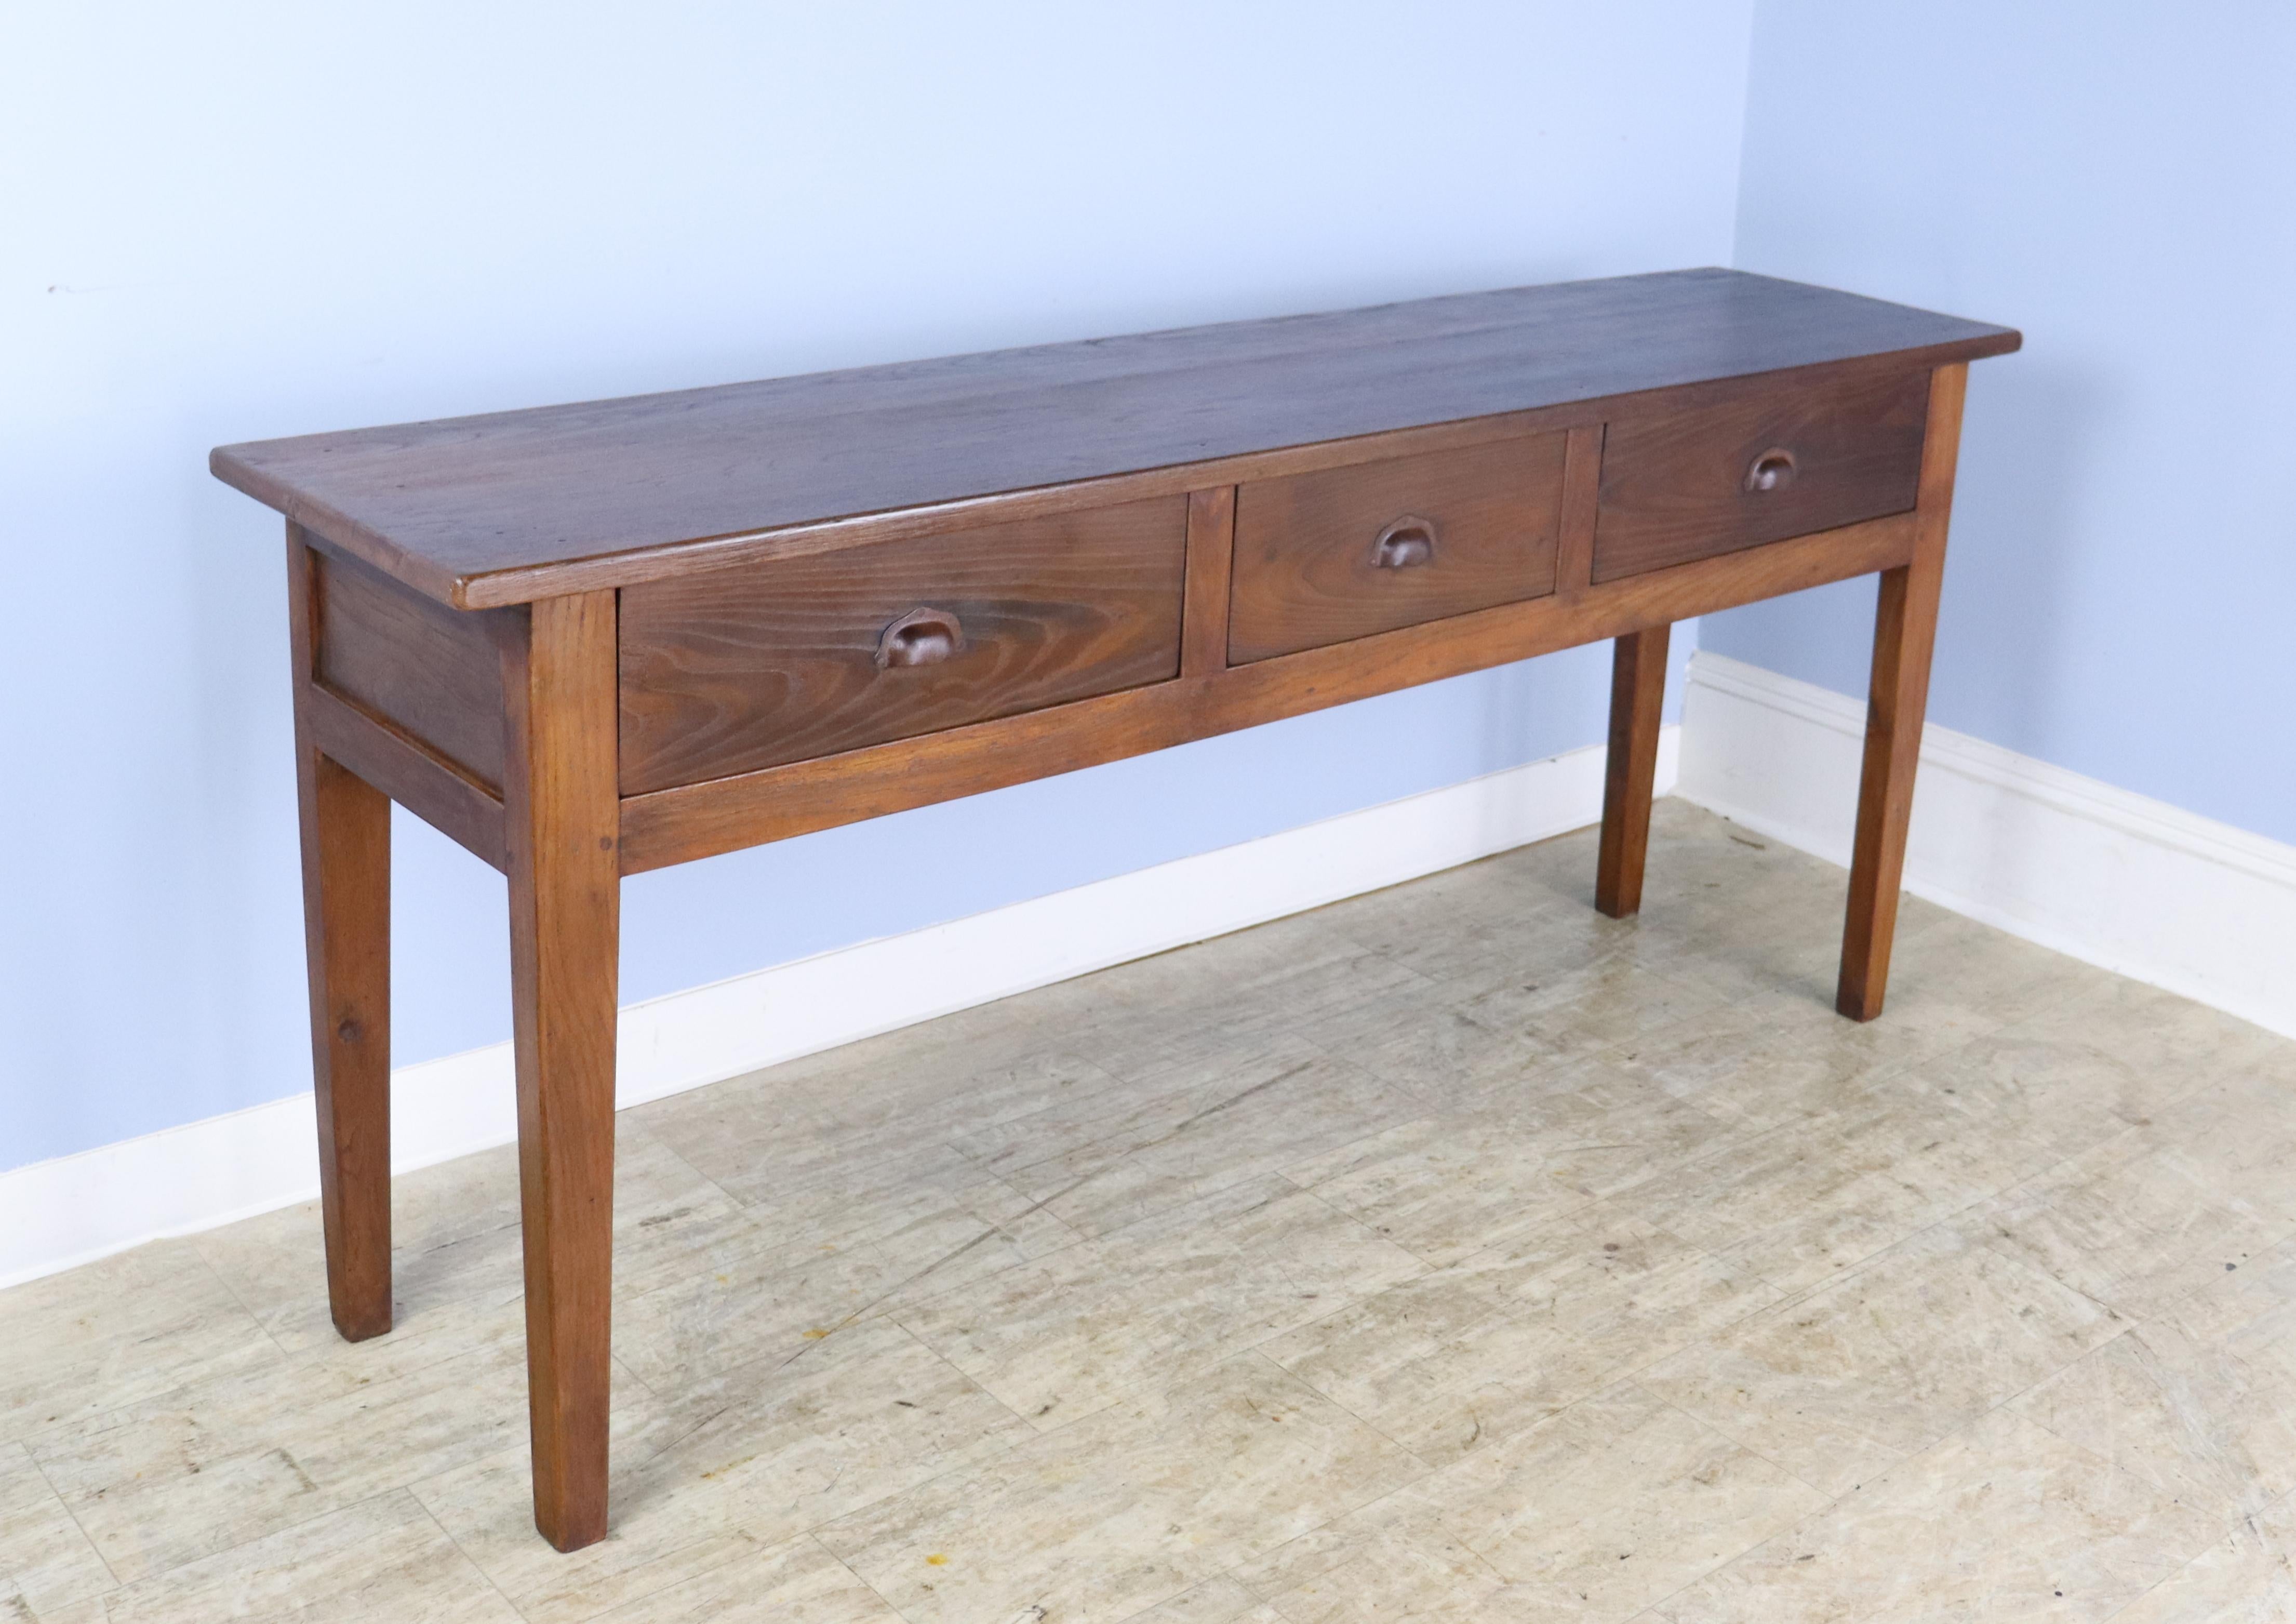 This handsome chestnut piece boasts the Classic three-drawer style on sturdy, slightly tapered legs.. At 17